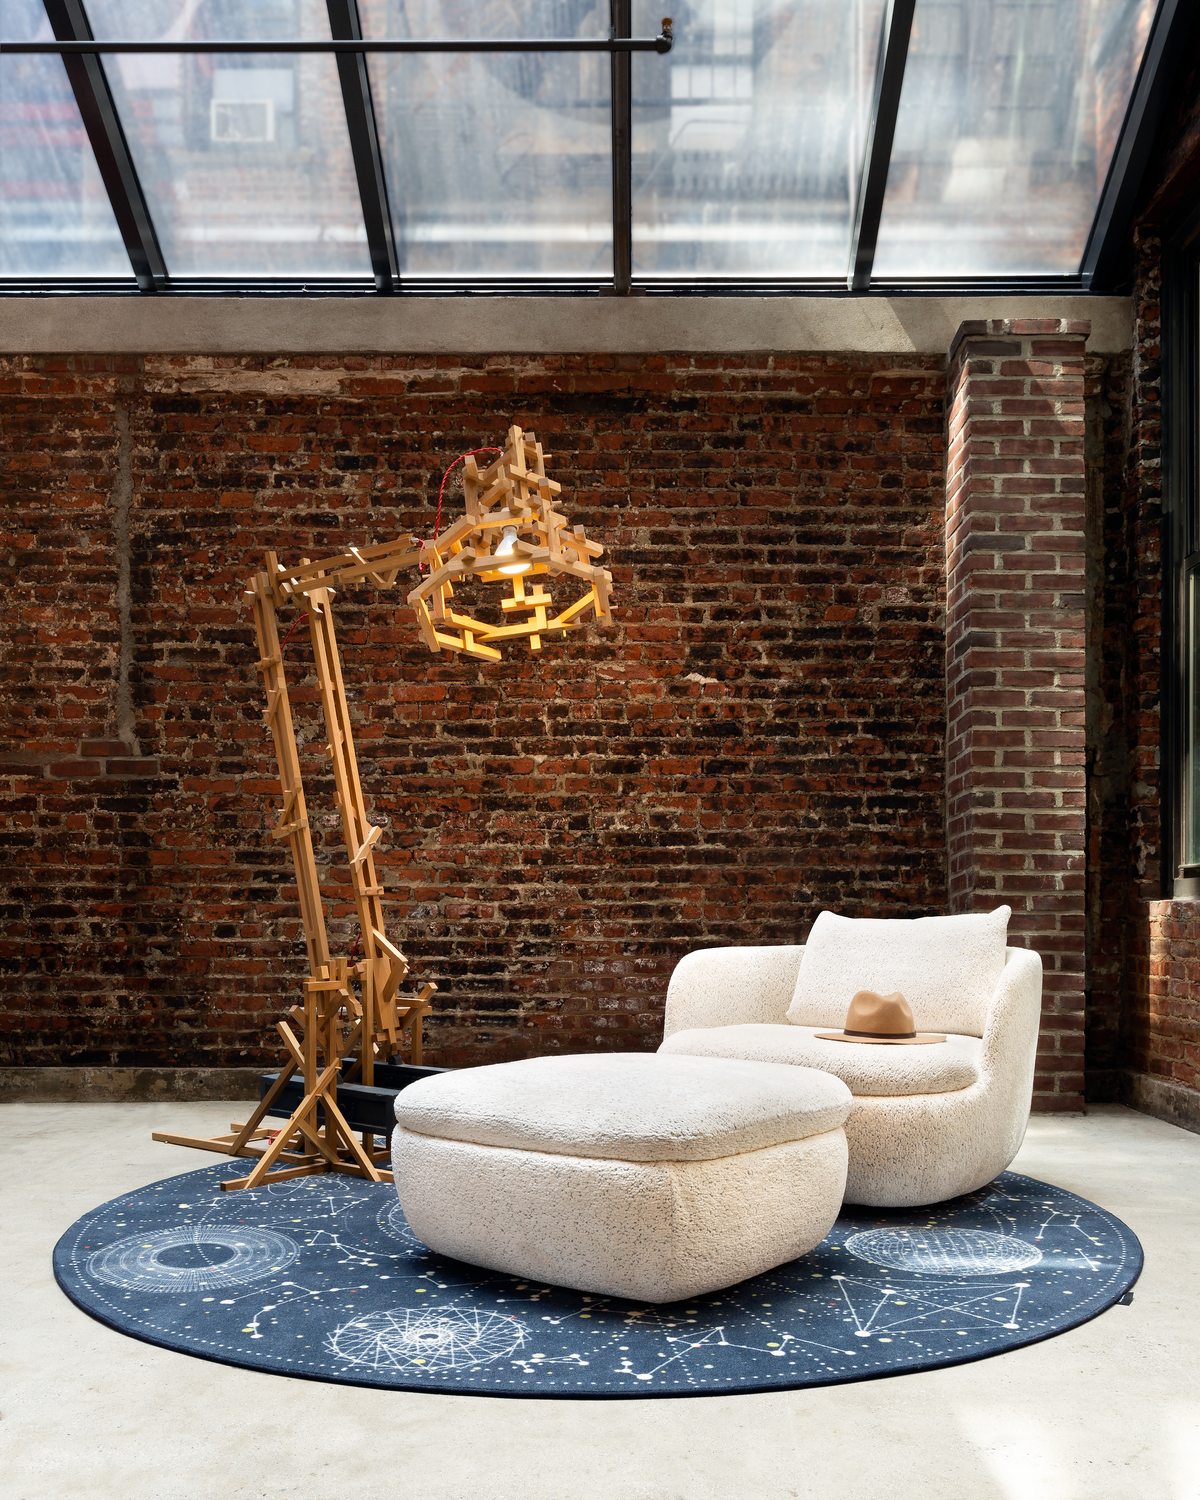 Interior of New York Showroom with Brave New World floor lamp, Bart Armchair and Moooi Carpet